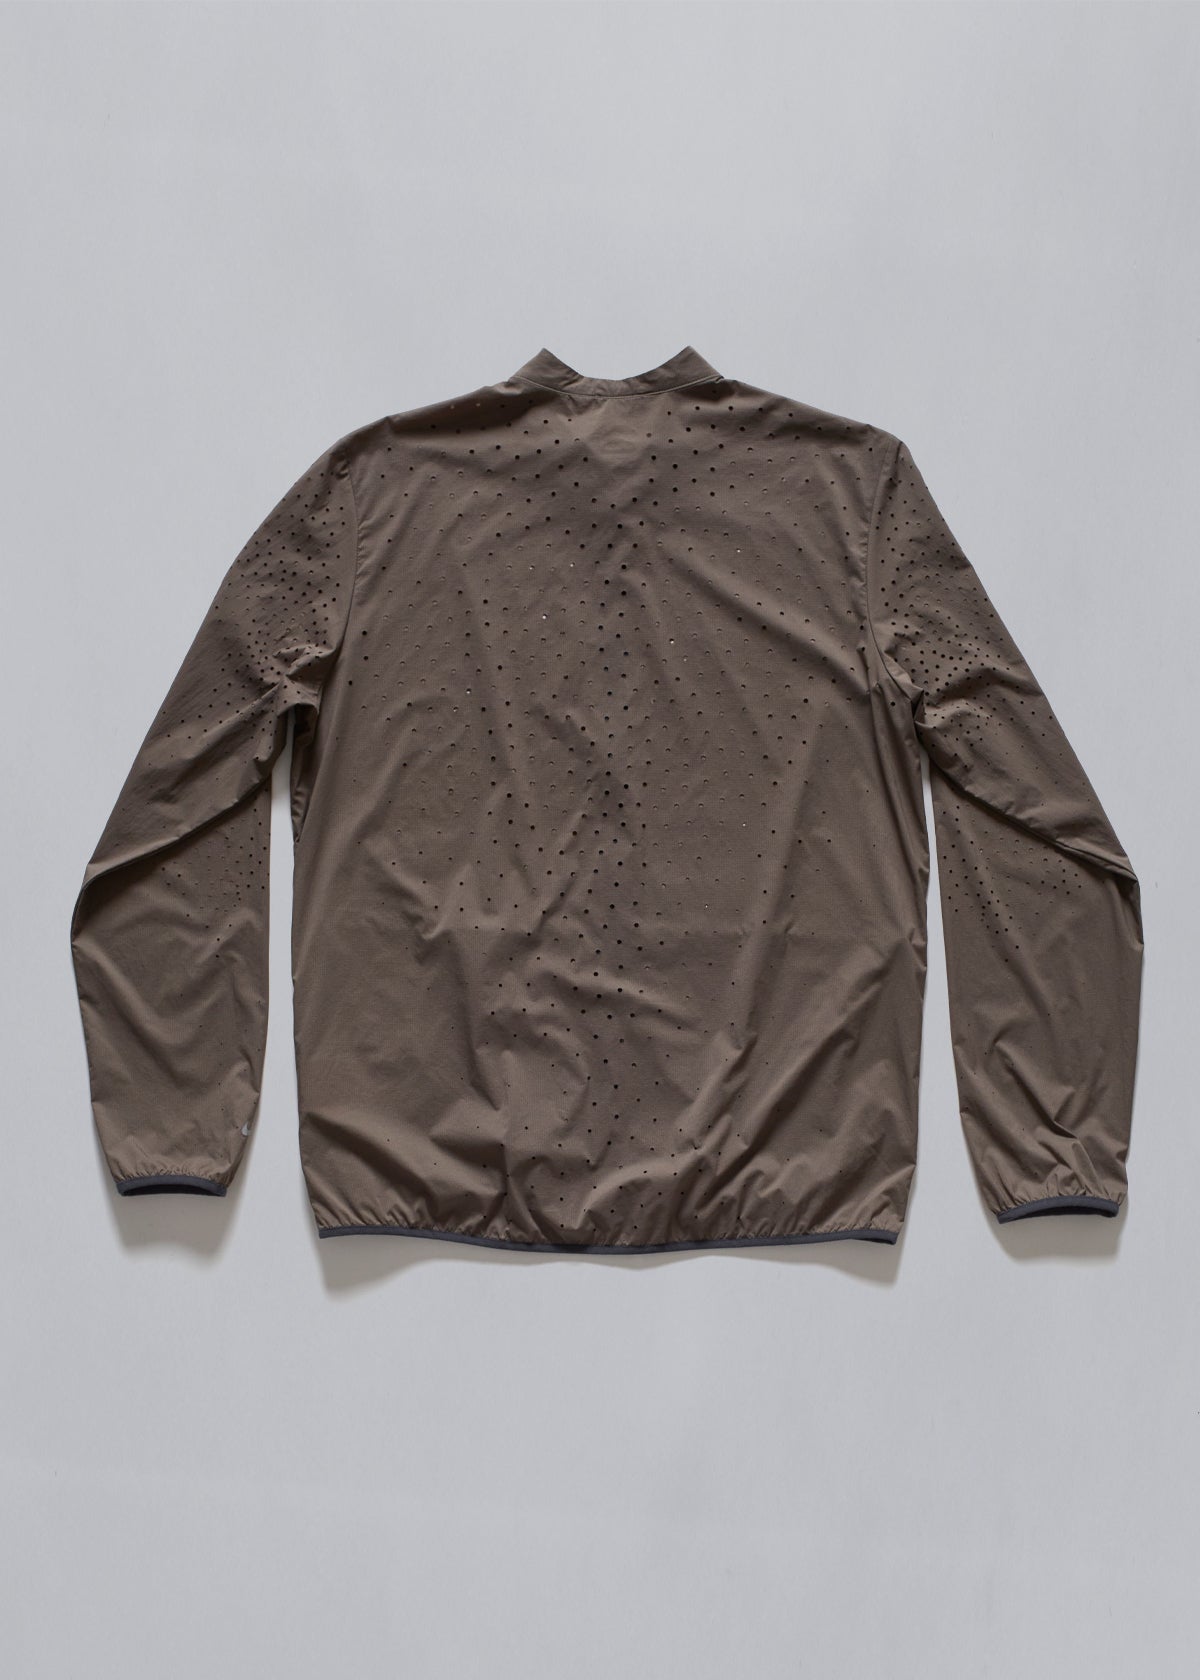 Nike/Undercover Gyakusou Perforated Running Jacket SS2016 - Large - The Archivist Store